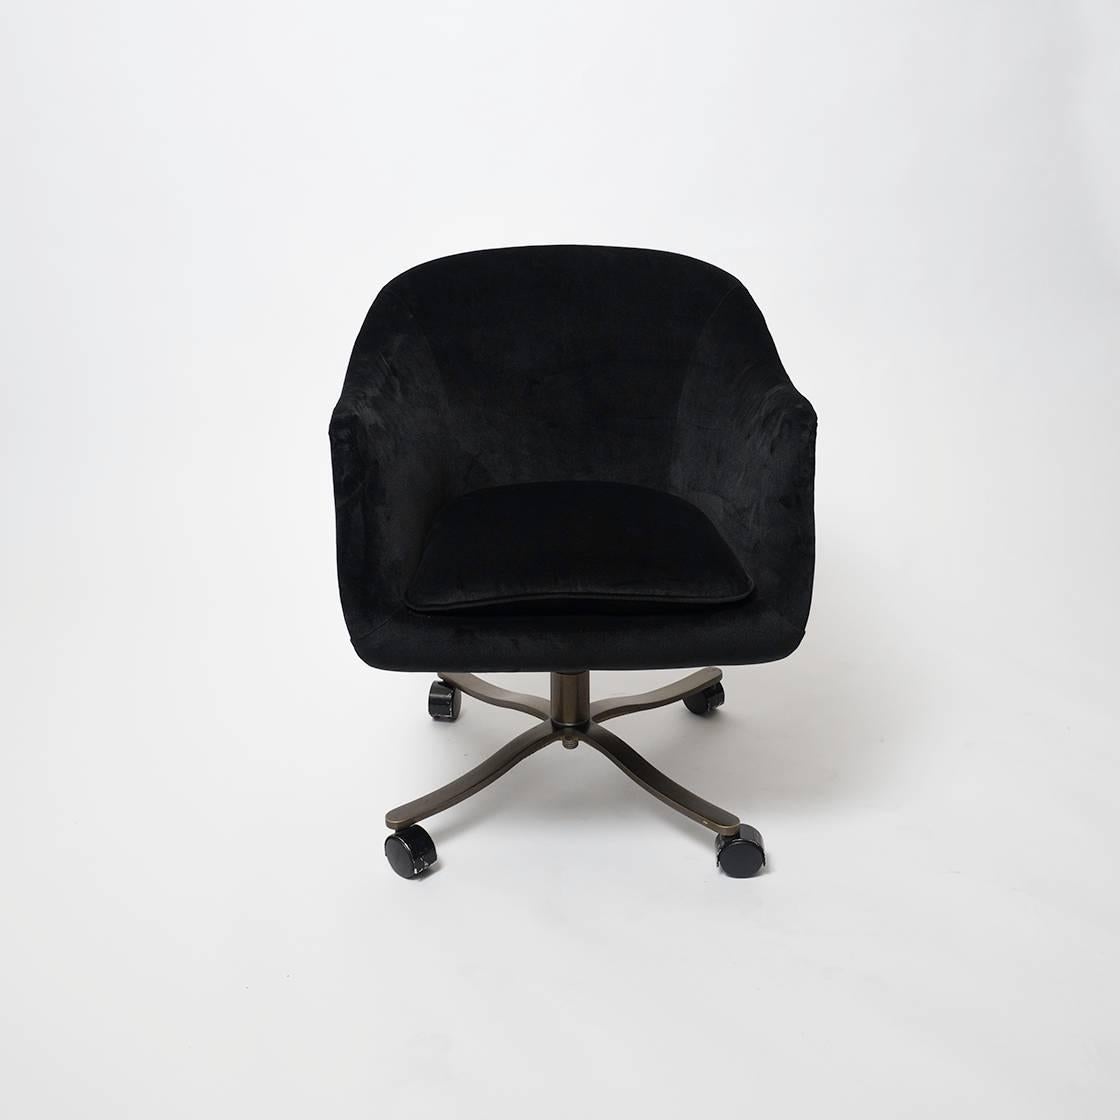 The CH6 bucket chair designed by Nicos Zographos in 1964. This is the swiveling version with a four-star bronze base and original Shepherd casters. The body of the chair is upholstered in the original black velveteen fabric, which is in pristine